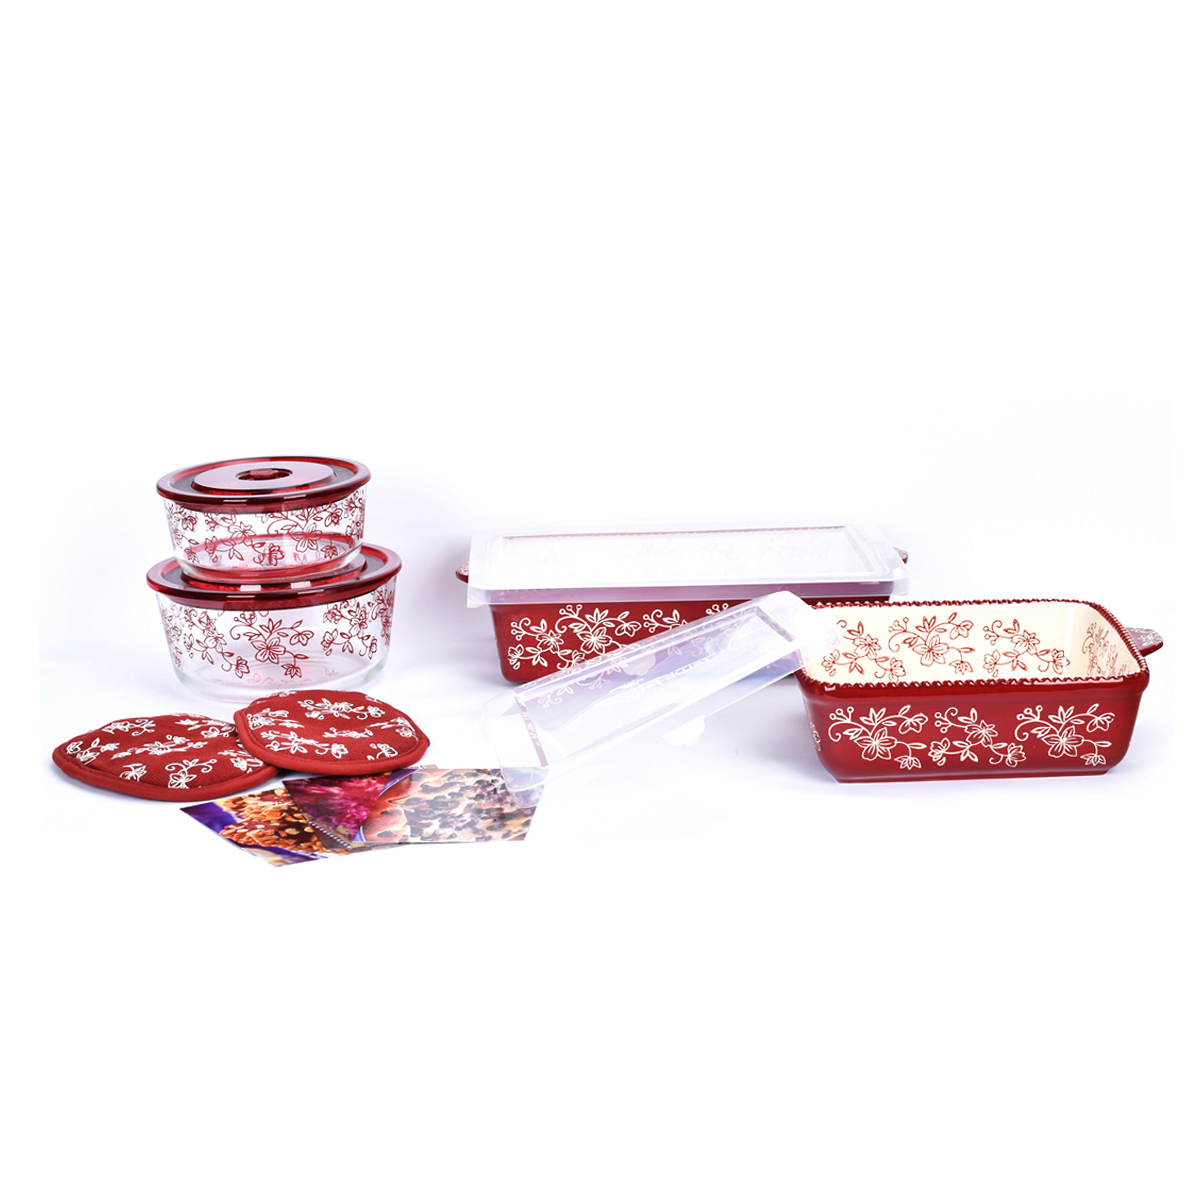 temp-tations® Floral Lace All-In-One Bakers Bundle – 7 Piece – Cranberry